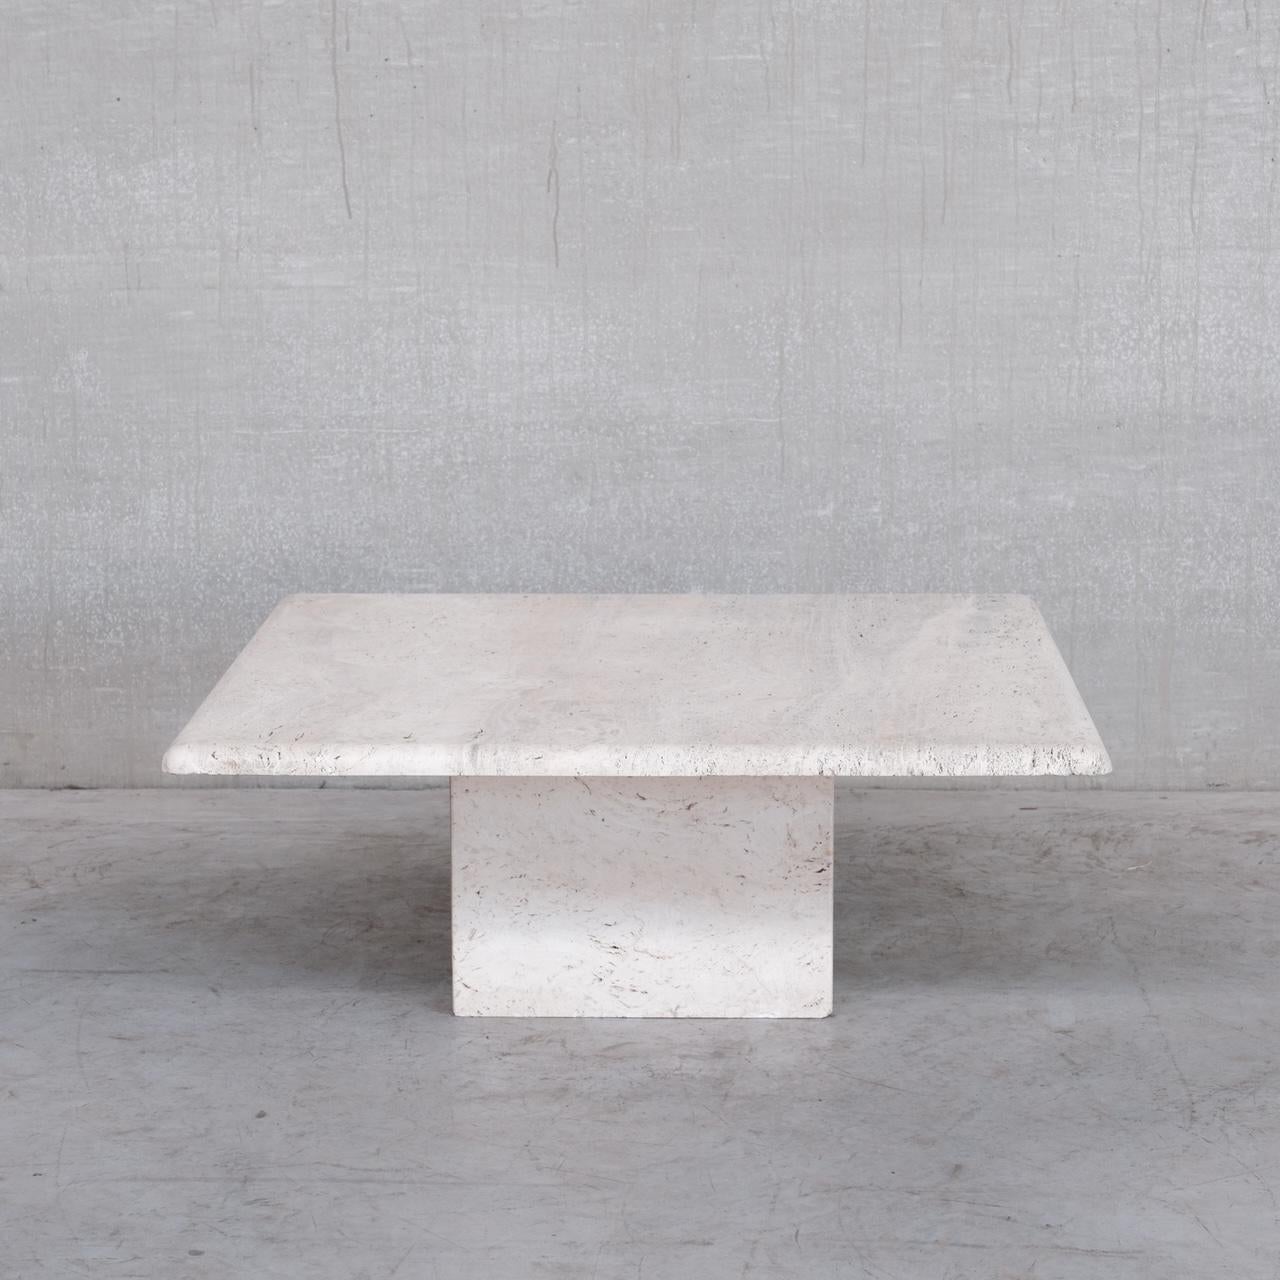 A large open travertine table. 

Italy, c1970s. 

Possibly by Up&Up as it is very good quality. 

The travertine is not polished or varnished so has that lovely natural muted colour. 

Some occasional nicks but generally very good condition.